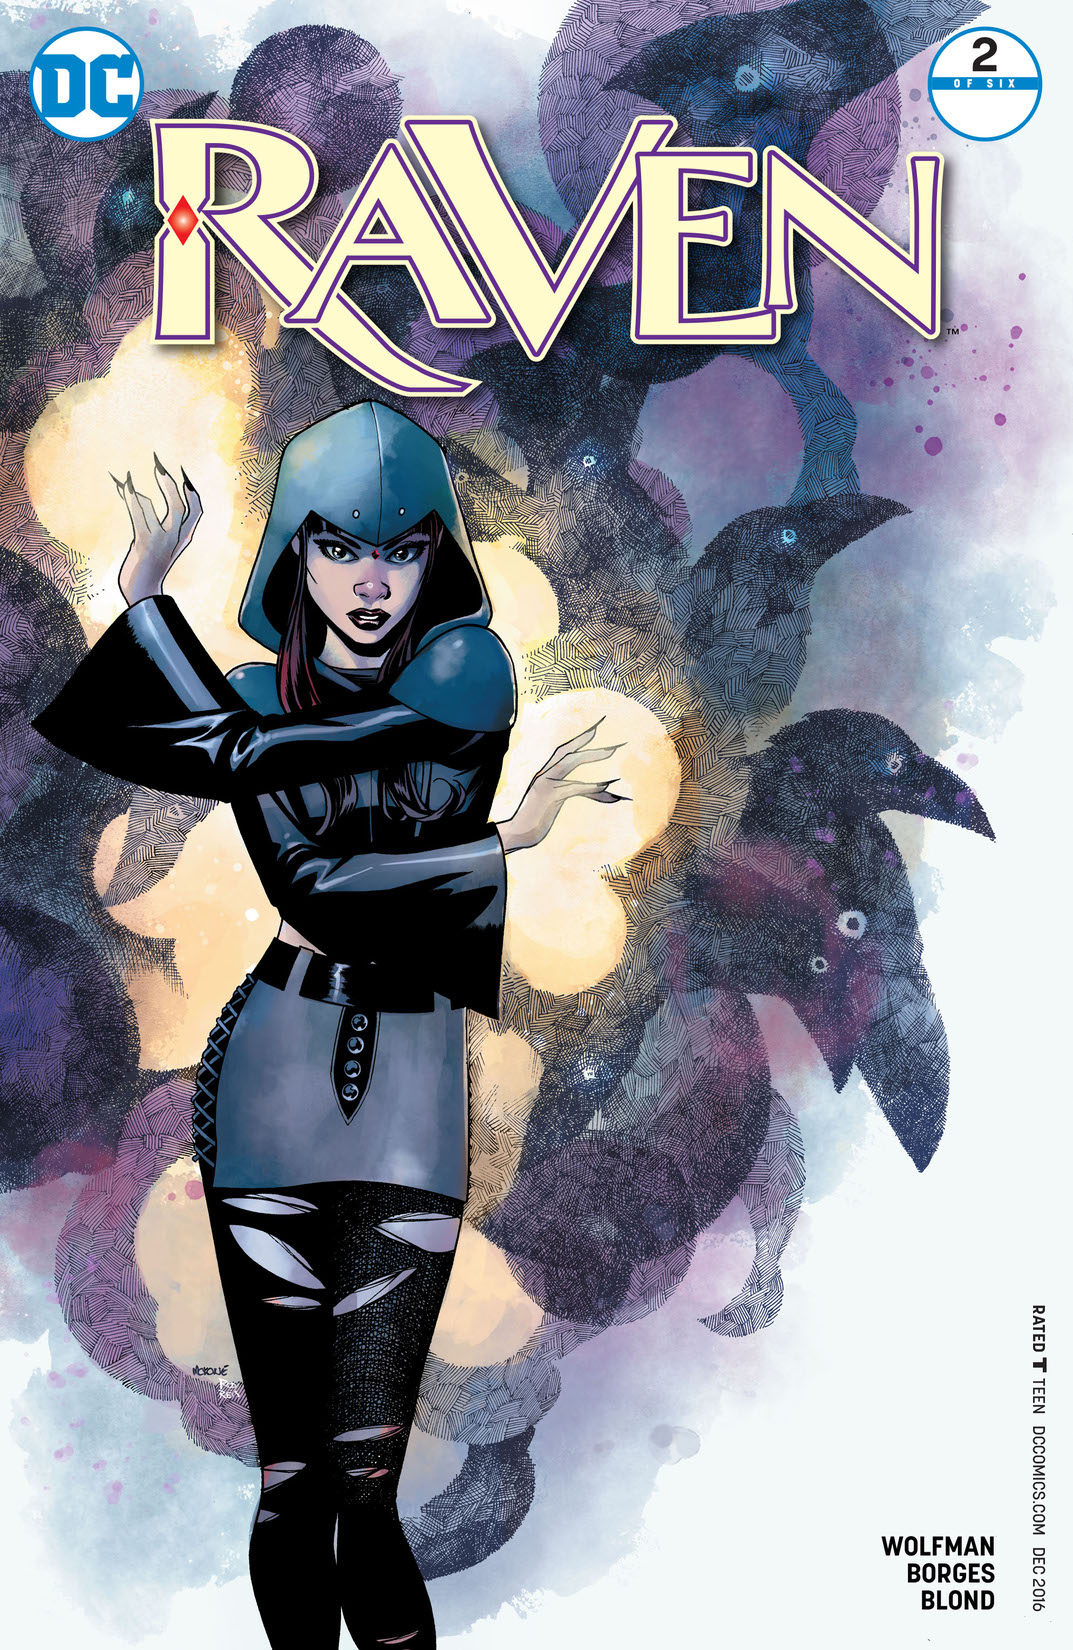 Raven #2 preview images